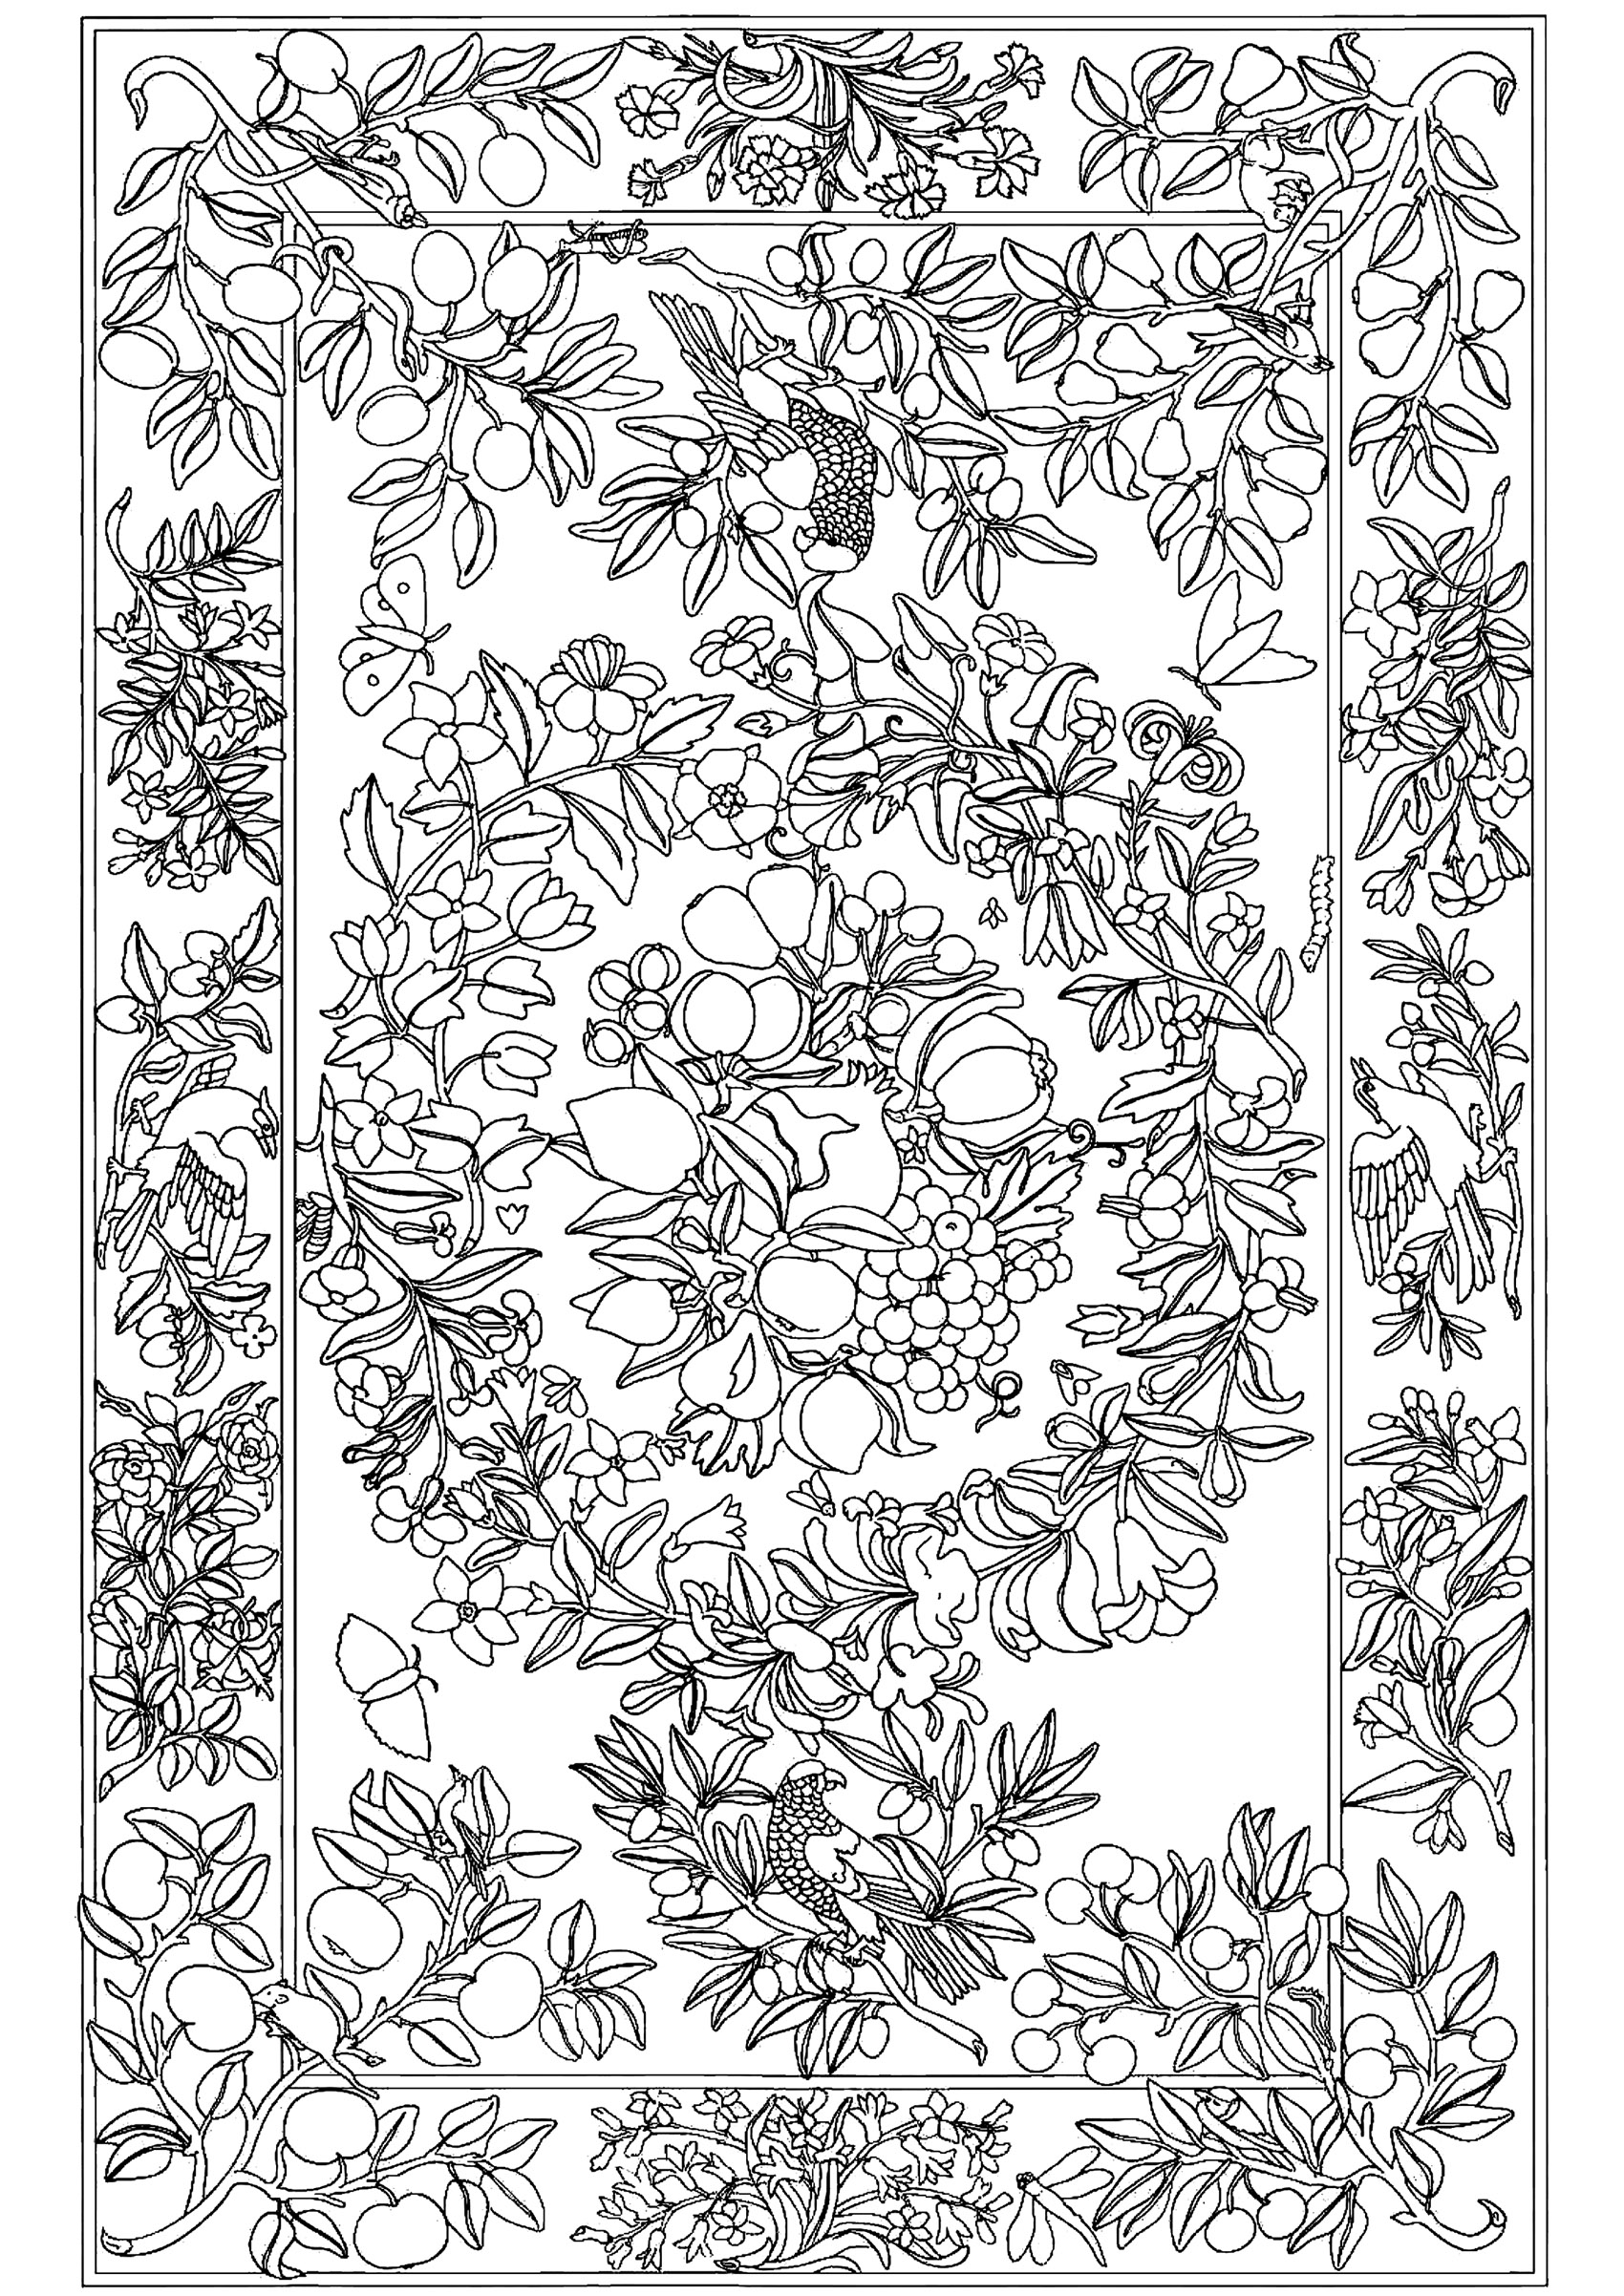 Flowers, leaves and birds (marquetry). Coloring created from a work of marquetry (17th century, France).Marquetry is a decorative technique using veneers of wood and various other materials, cut to a design and glued to a support, particularly in cabinetmaking. The resulting images can be geometric, figurative or abstract.